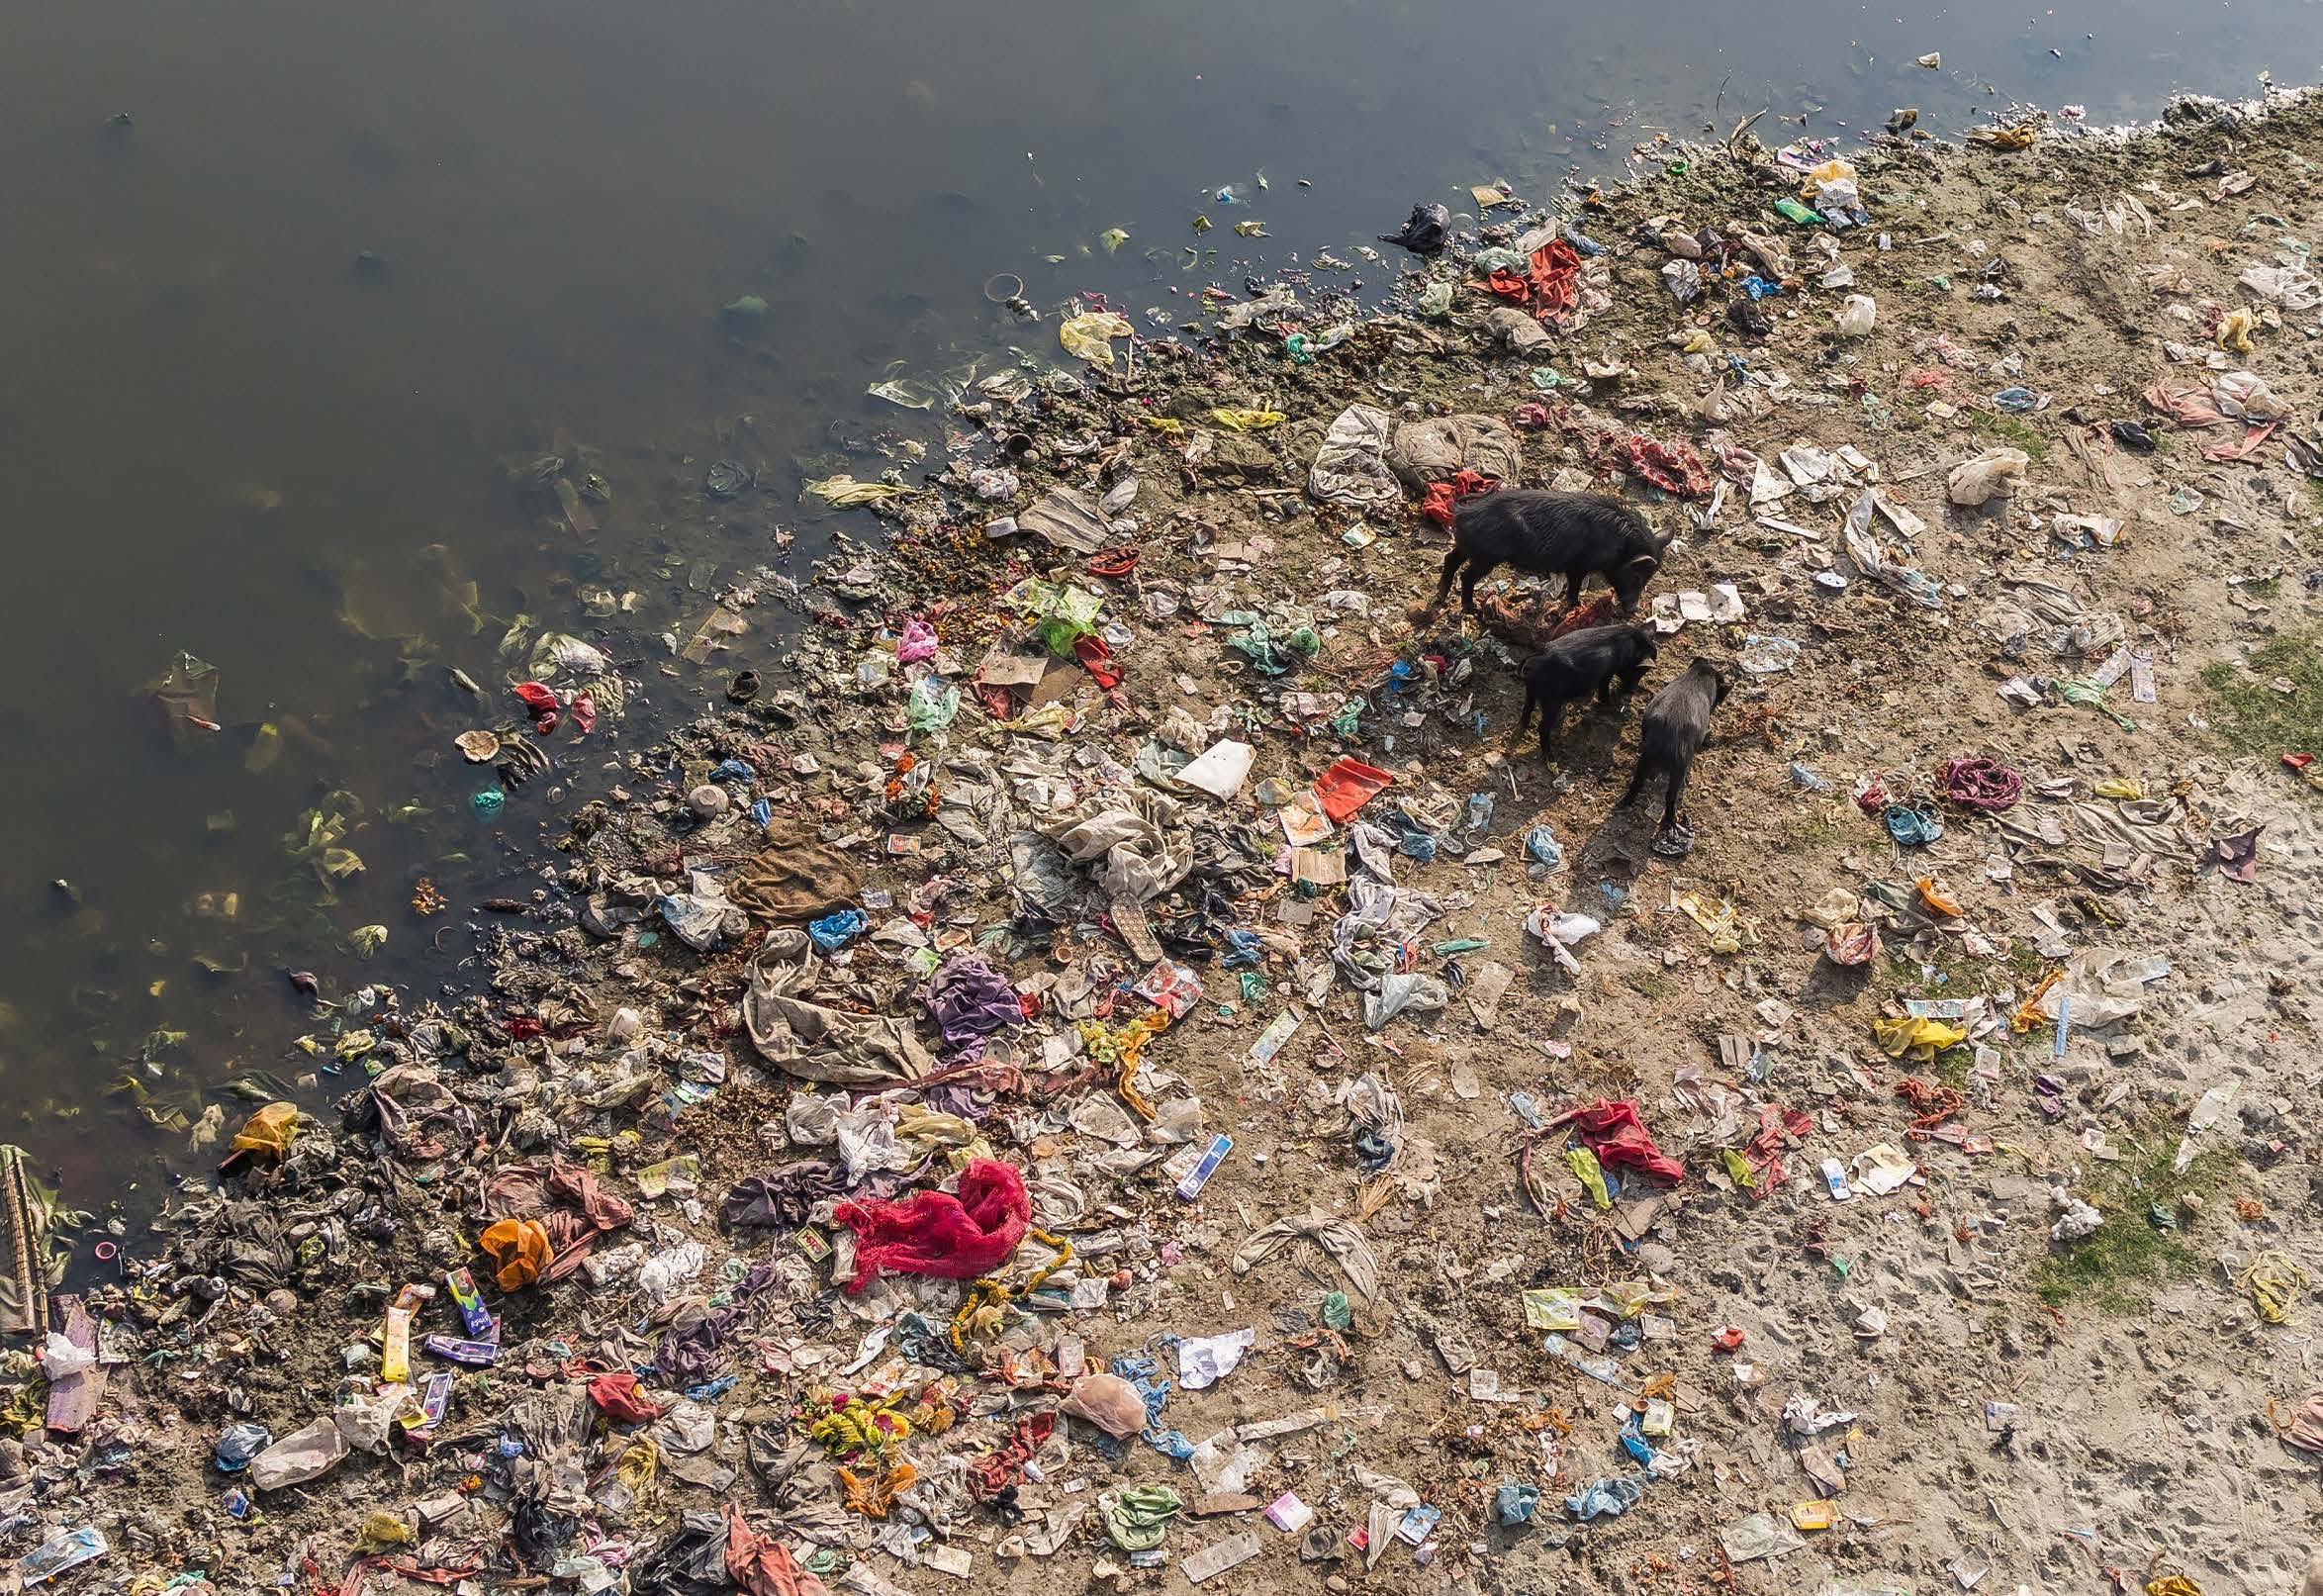 High Concentration Of Plastics And Microplastics In Ganga: Study